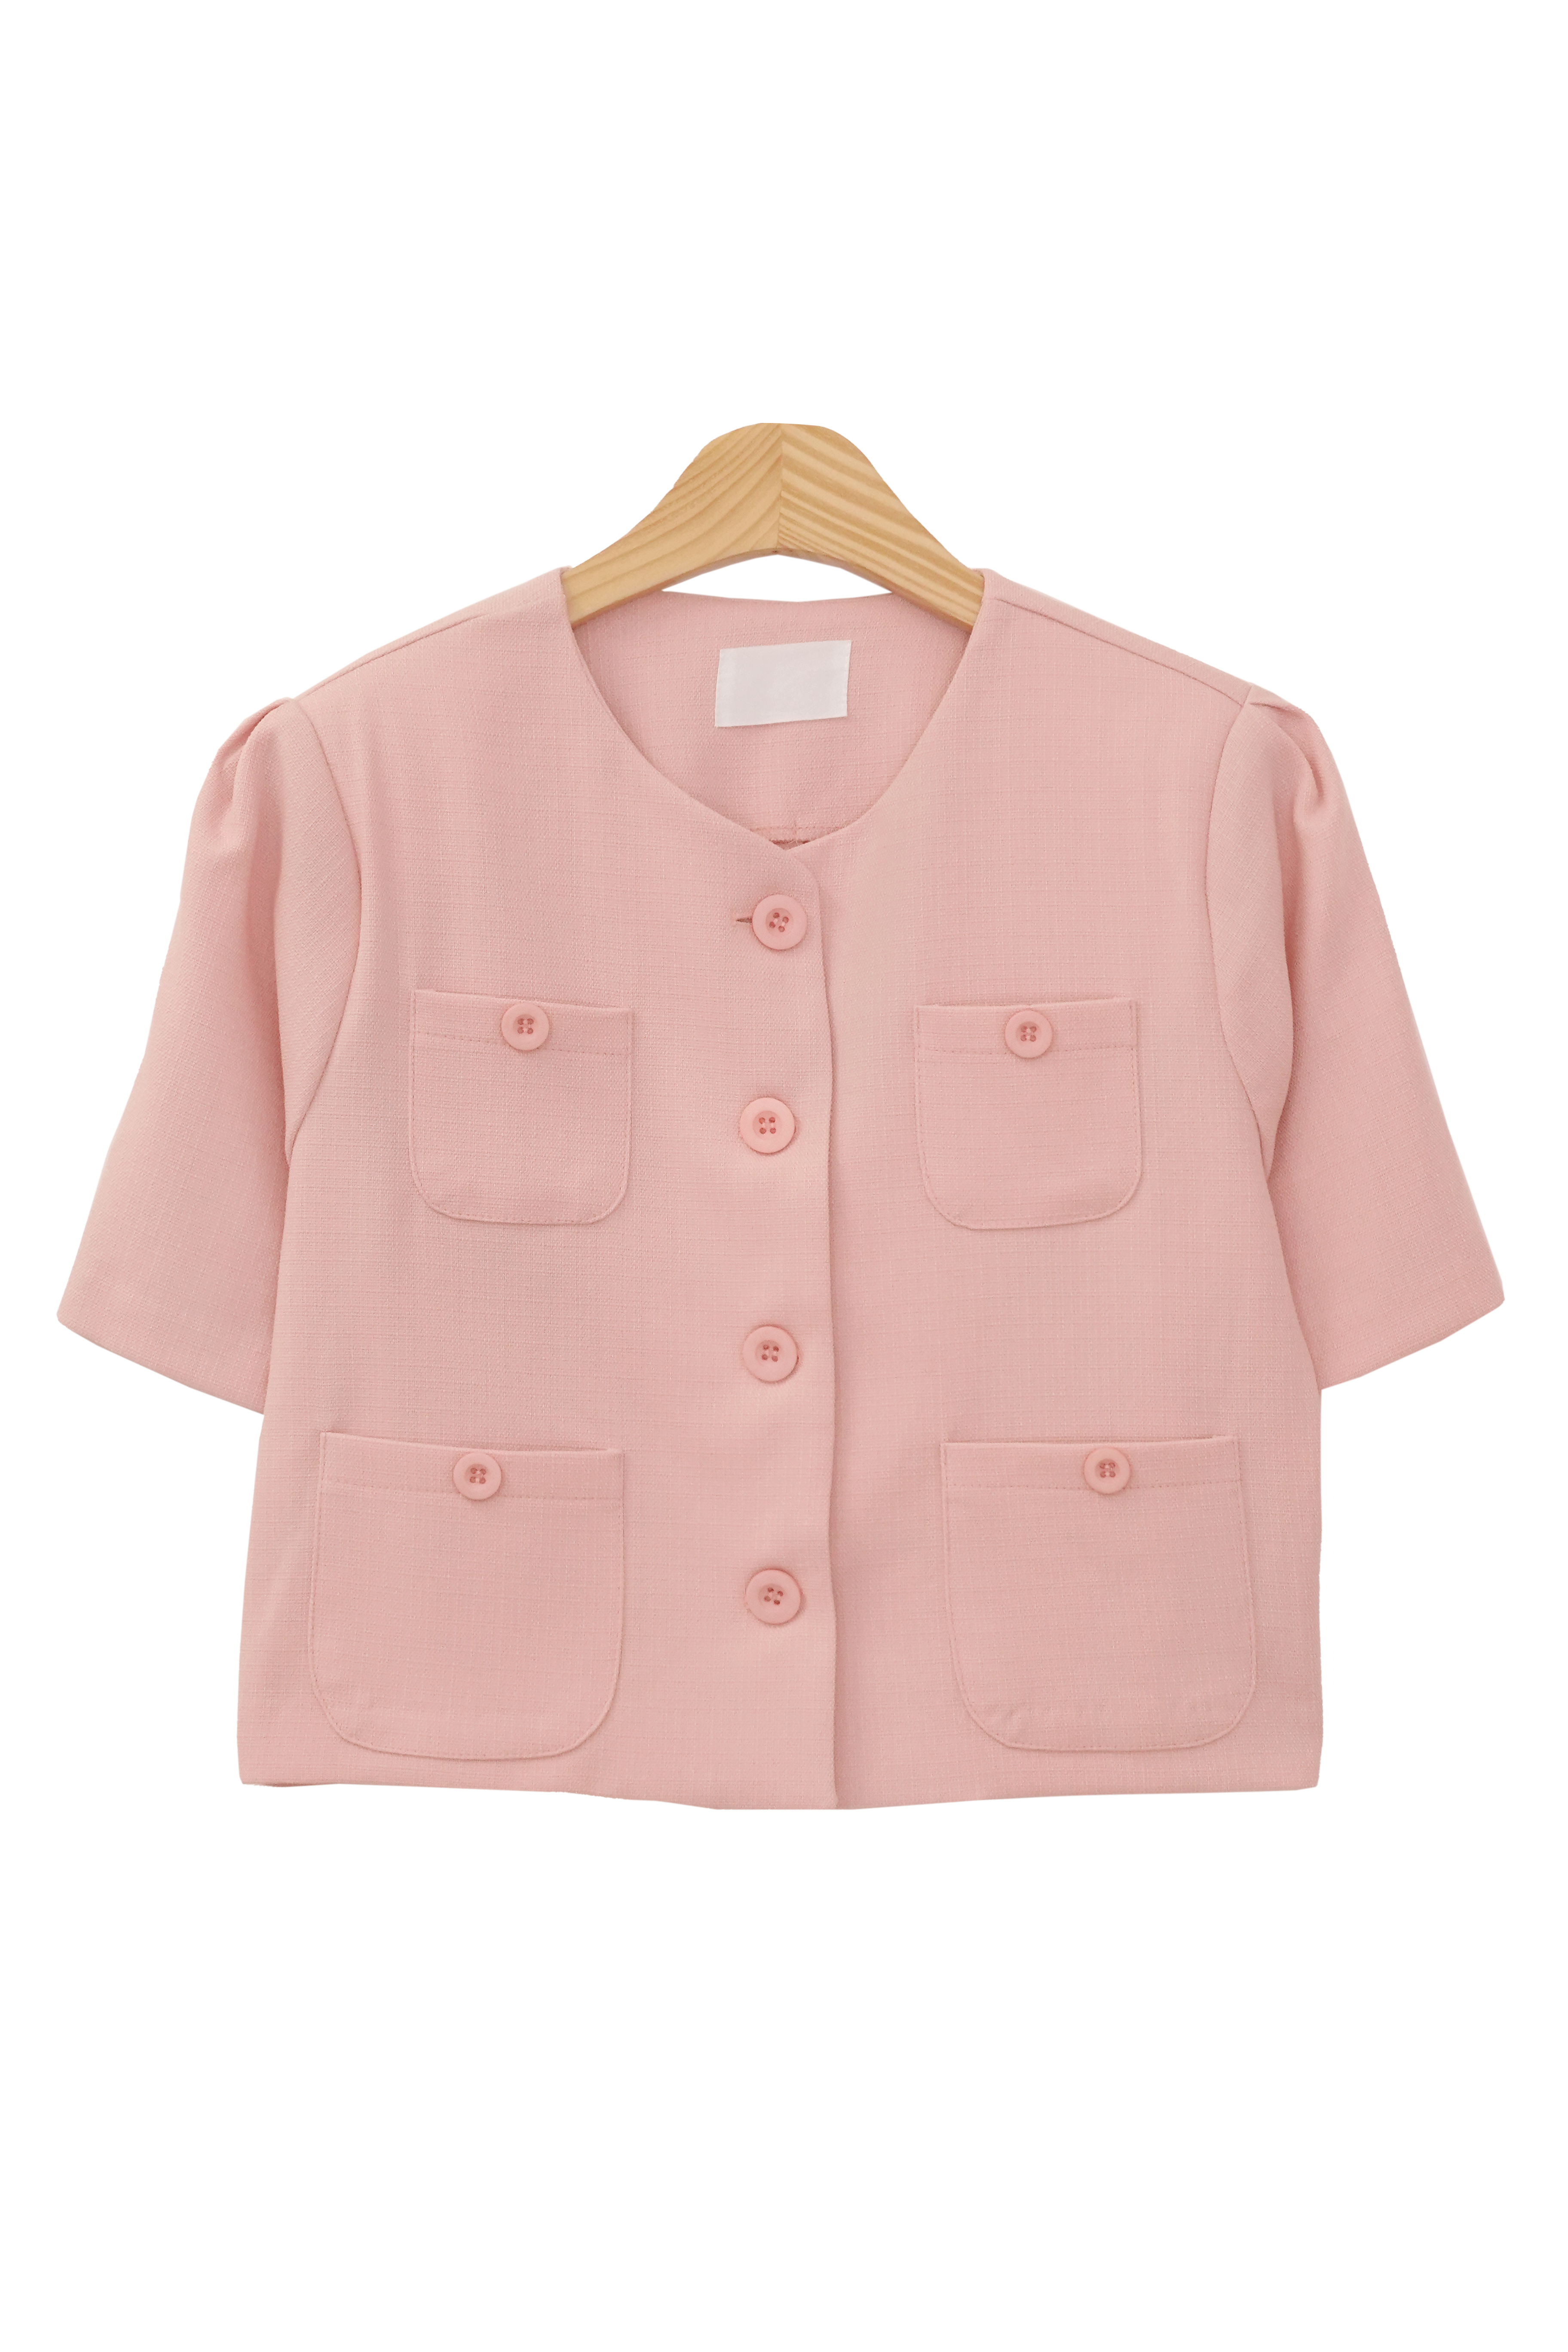 Olssen Summer No Collar Puff Blouse Cropped Short-Sleeved Jacket (4 colors)